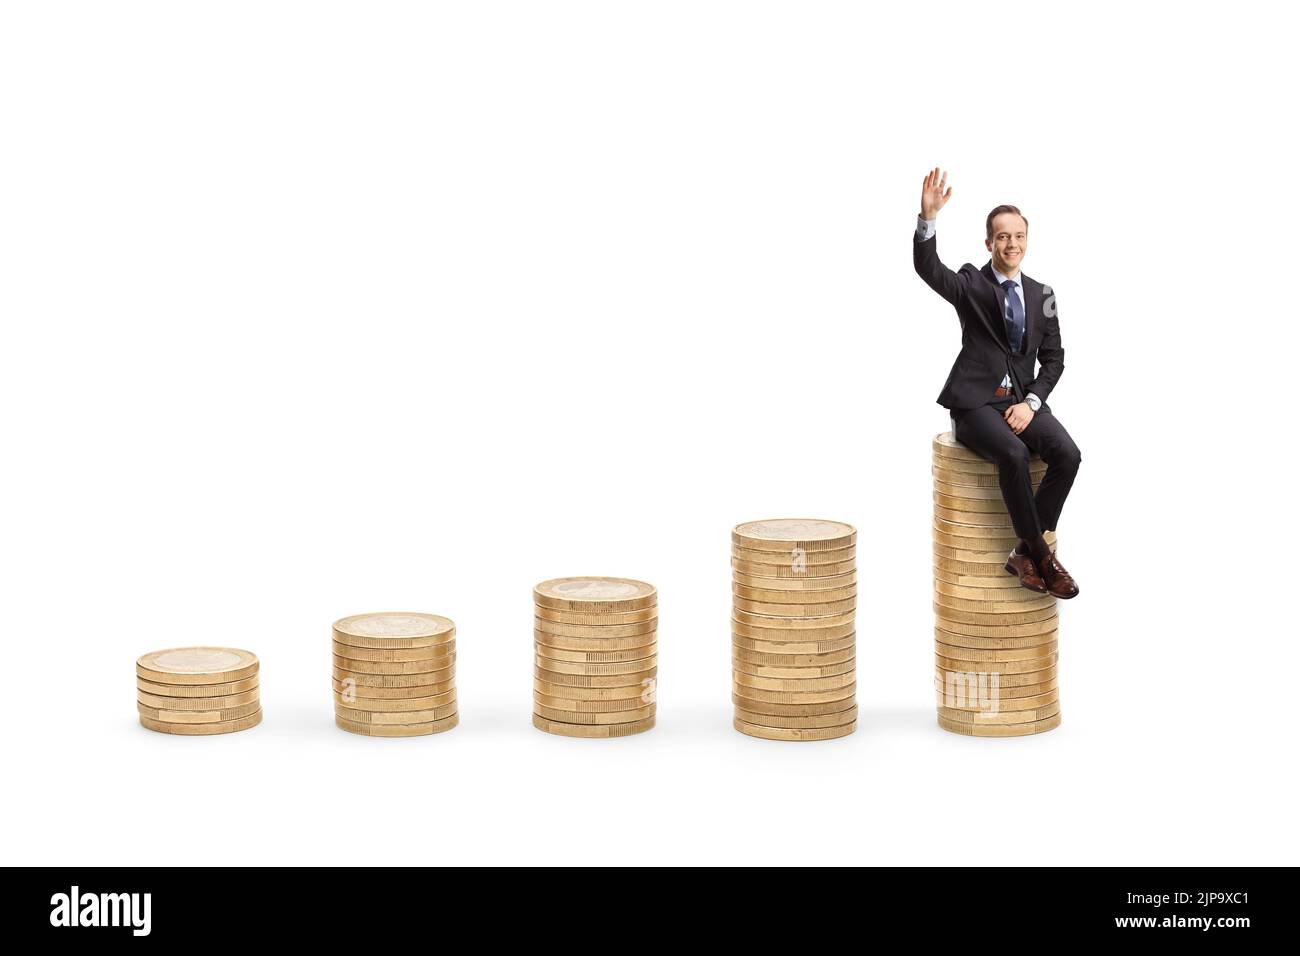 Businessman sitting on a pile of coins and waving at camera isolated on white background Stock Photo